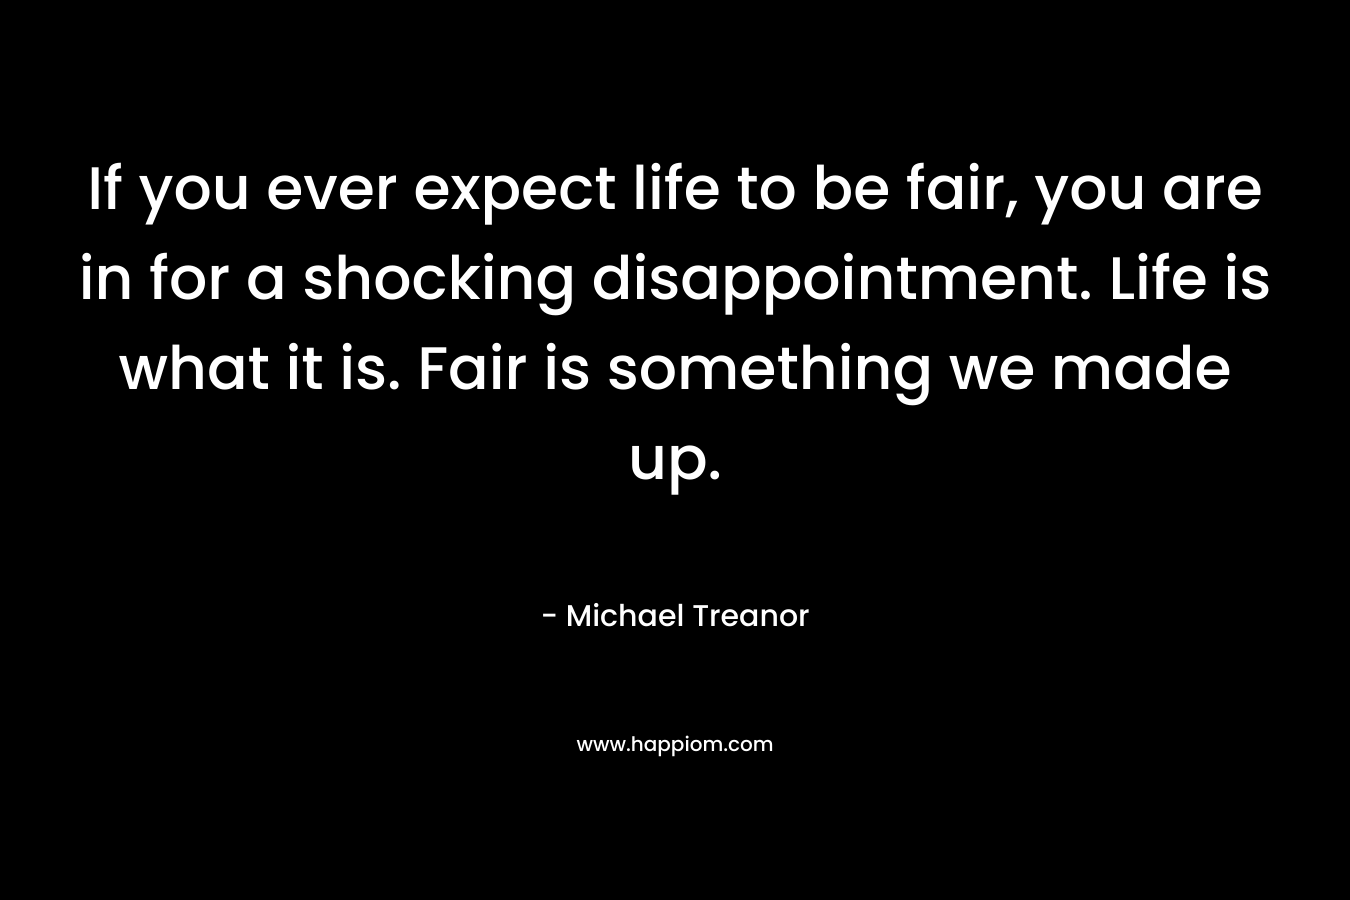 If you ever expect life to be fair, you are in for a shocking disappointment. Life is what it is. Fair is something we made up. – Michael Treanor